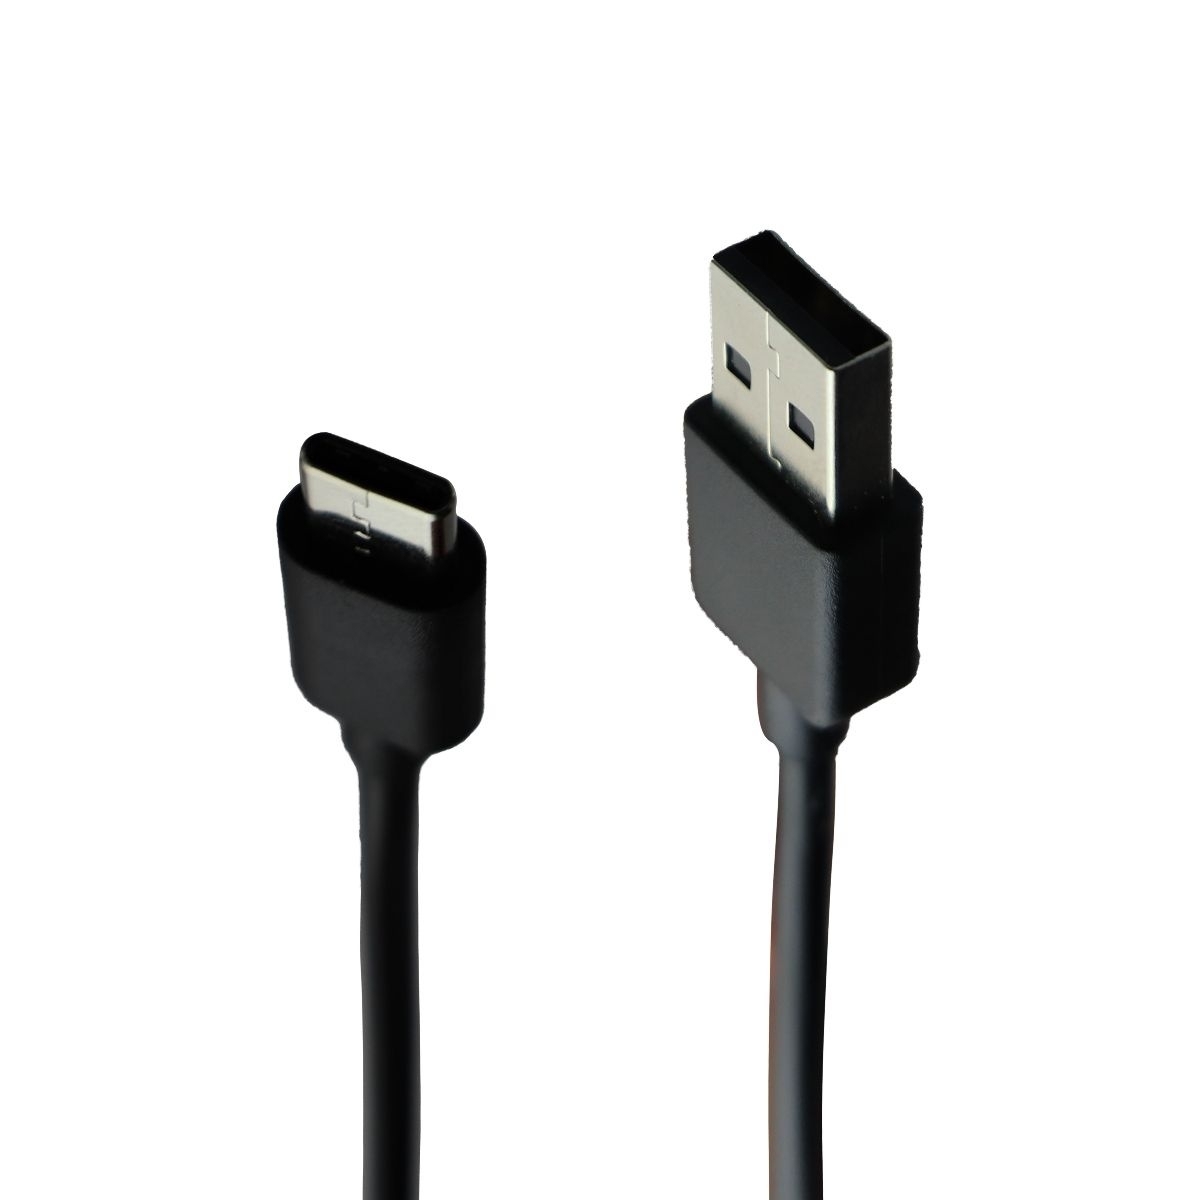 Orbic (2.5-Foot) USB-C To Standard USB Charge/Sync Cable - Black (RC545LCBL)